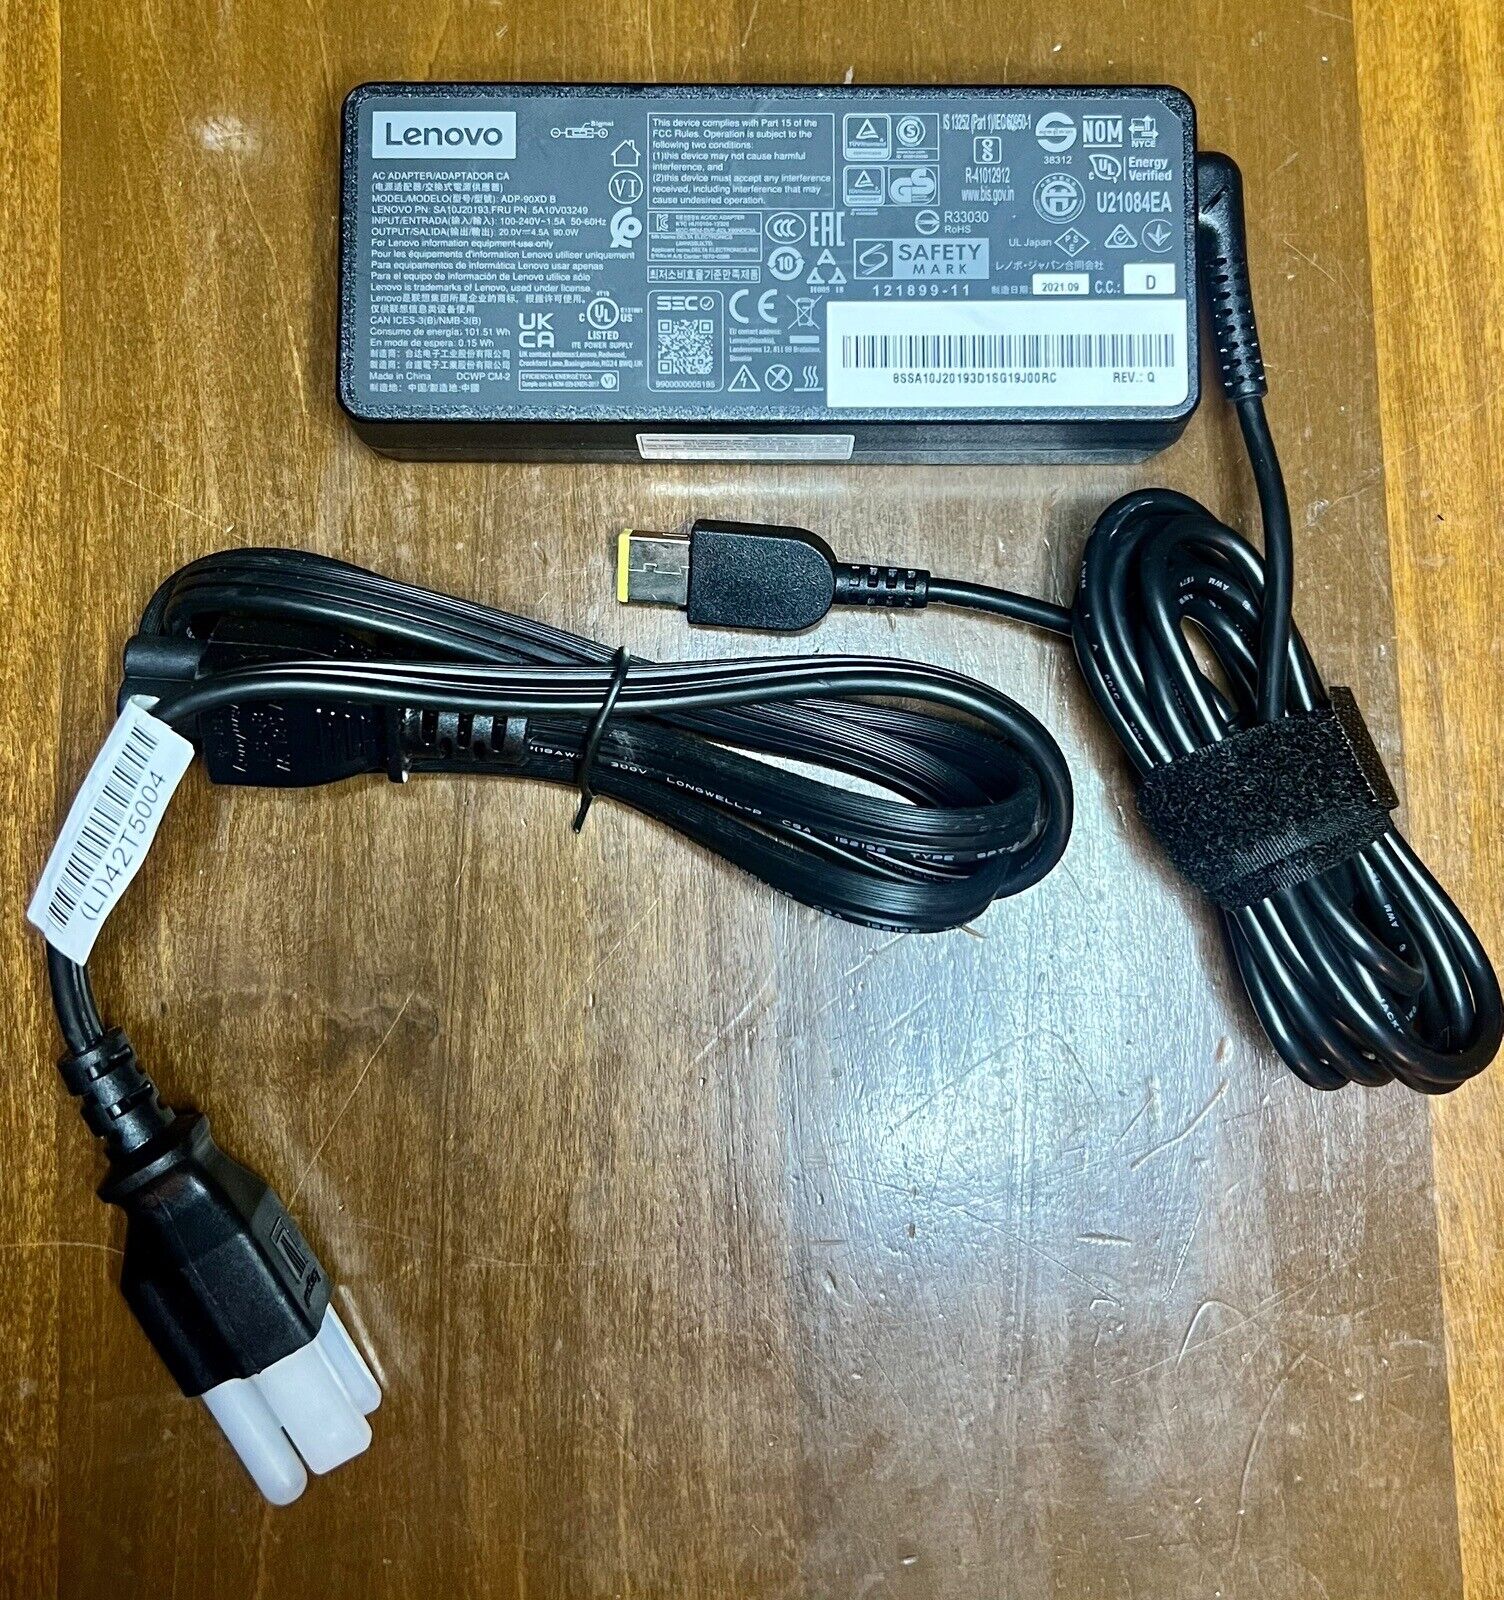 LOT 10 X Lenovo ThinkPad Laptop AC Charger Adapter 90W 20V 4.5A